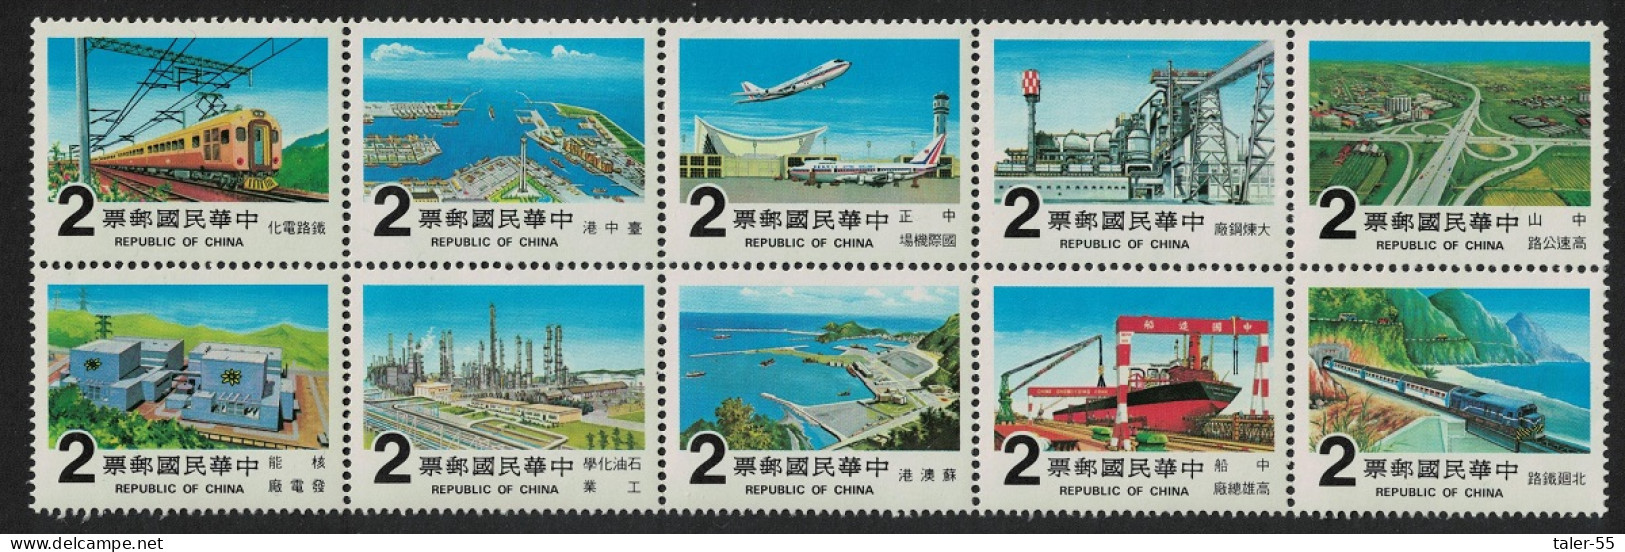 Taiwan Completion Of Ten Major Construction Projects 10v 1980 MNH SG#1316-1325 - Unused Stamps